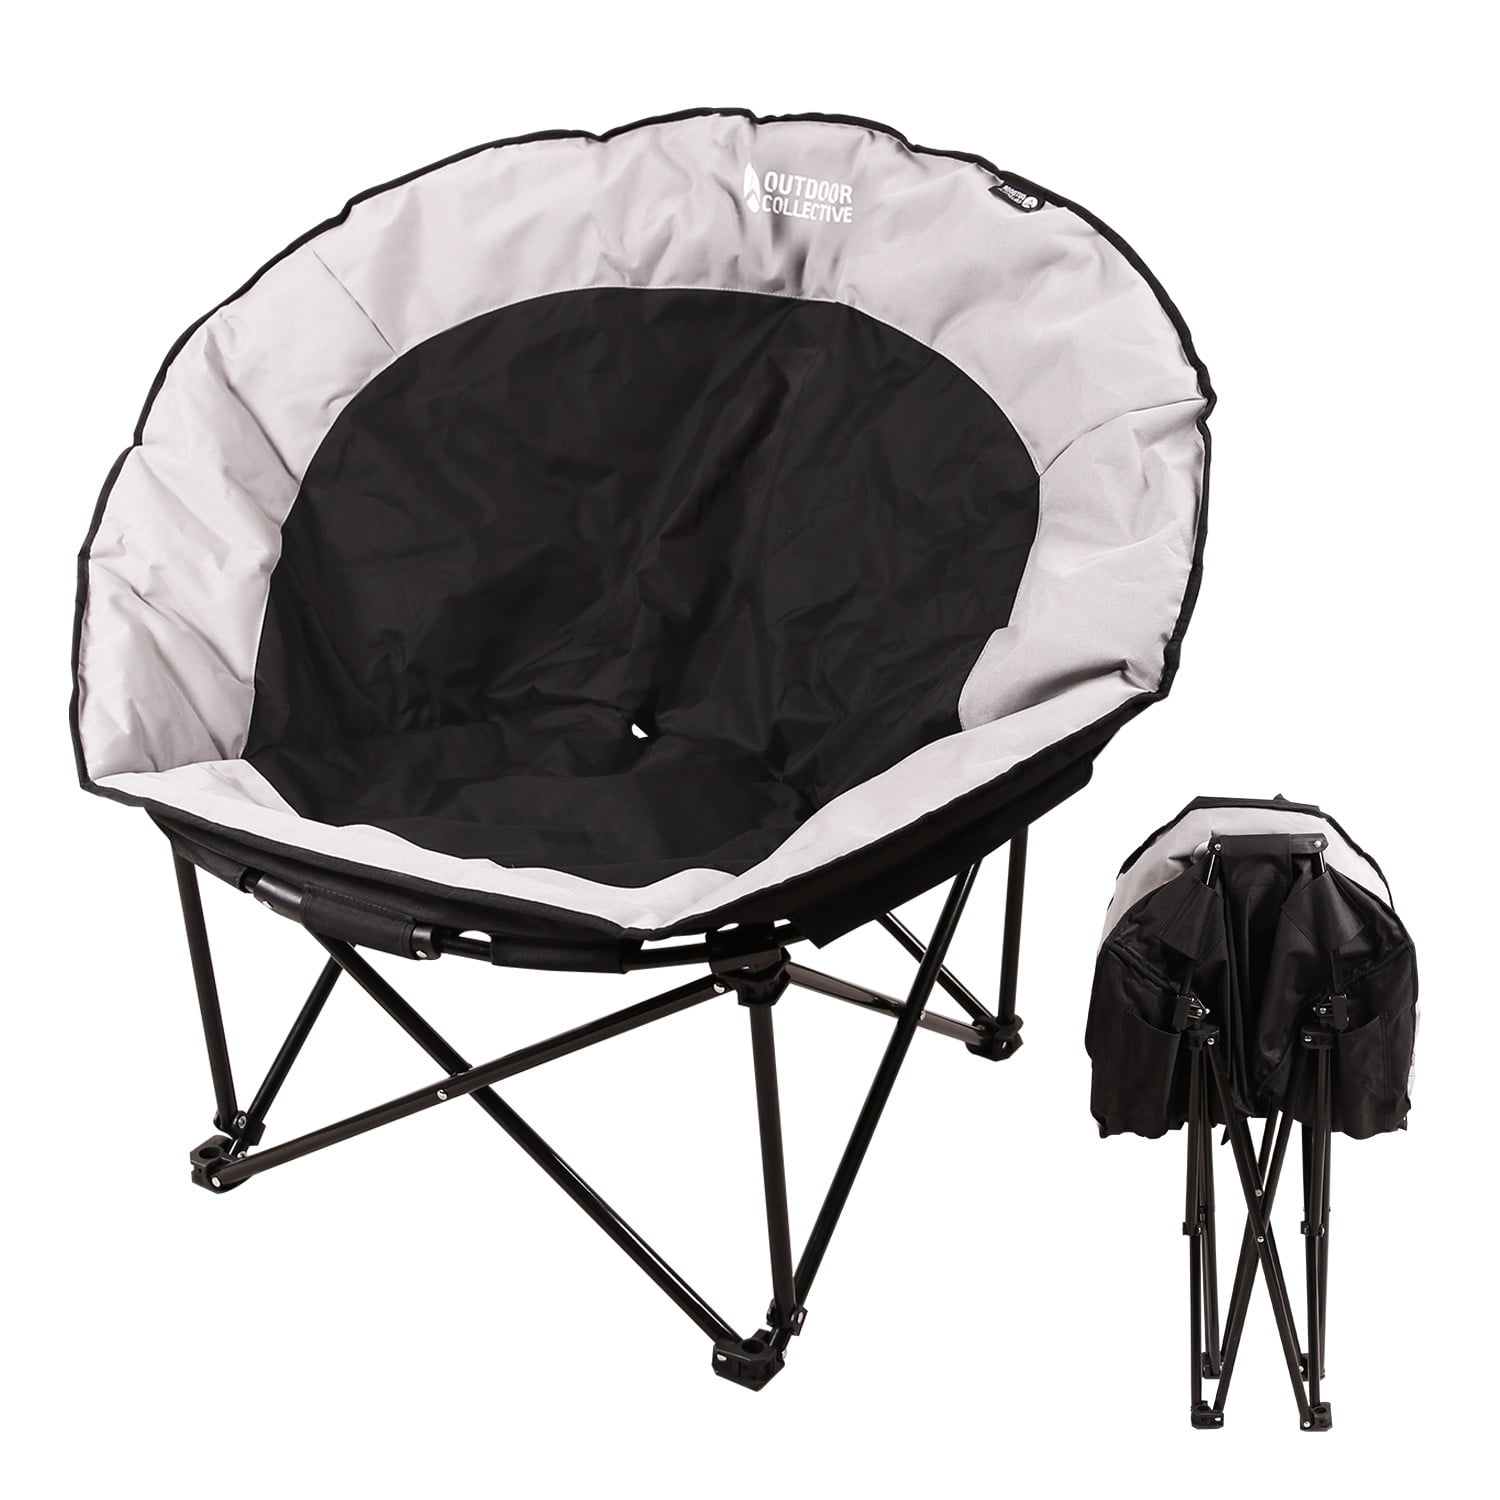 redcamp oversized moon chairs for adults comfy portable